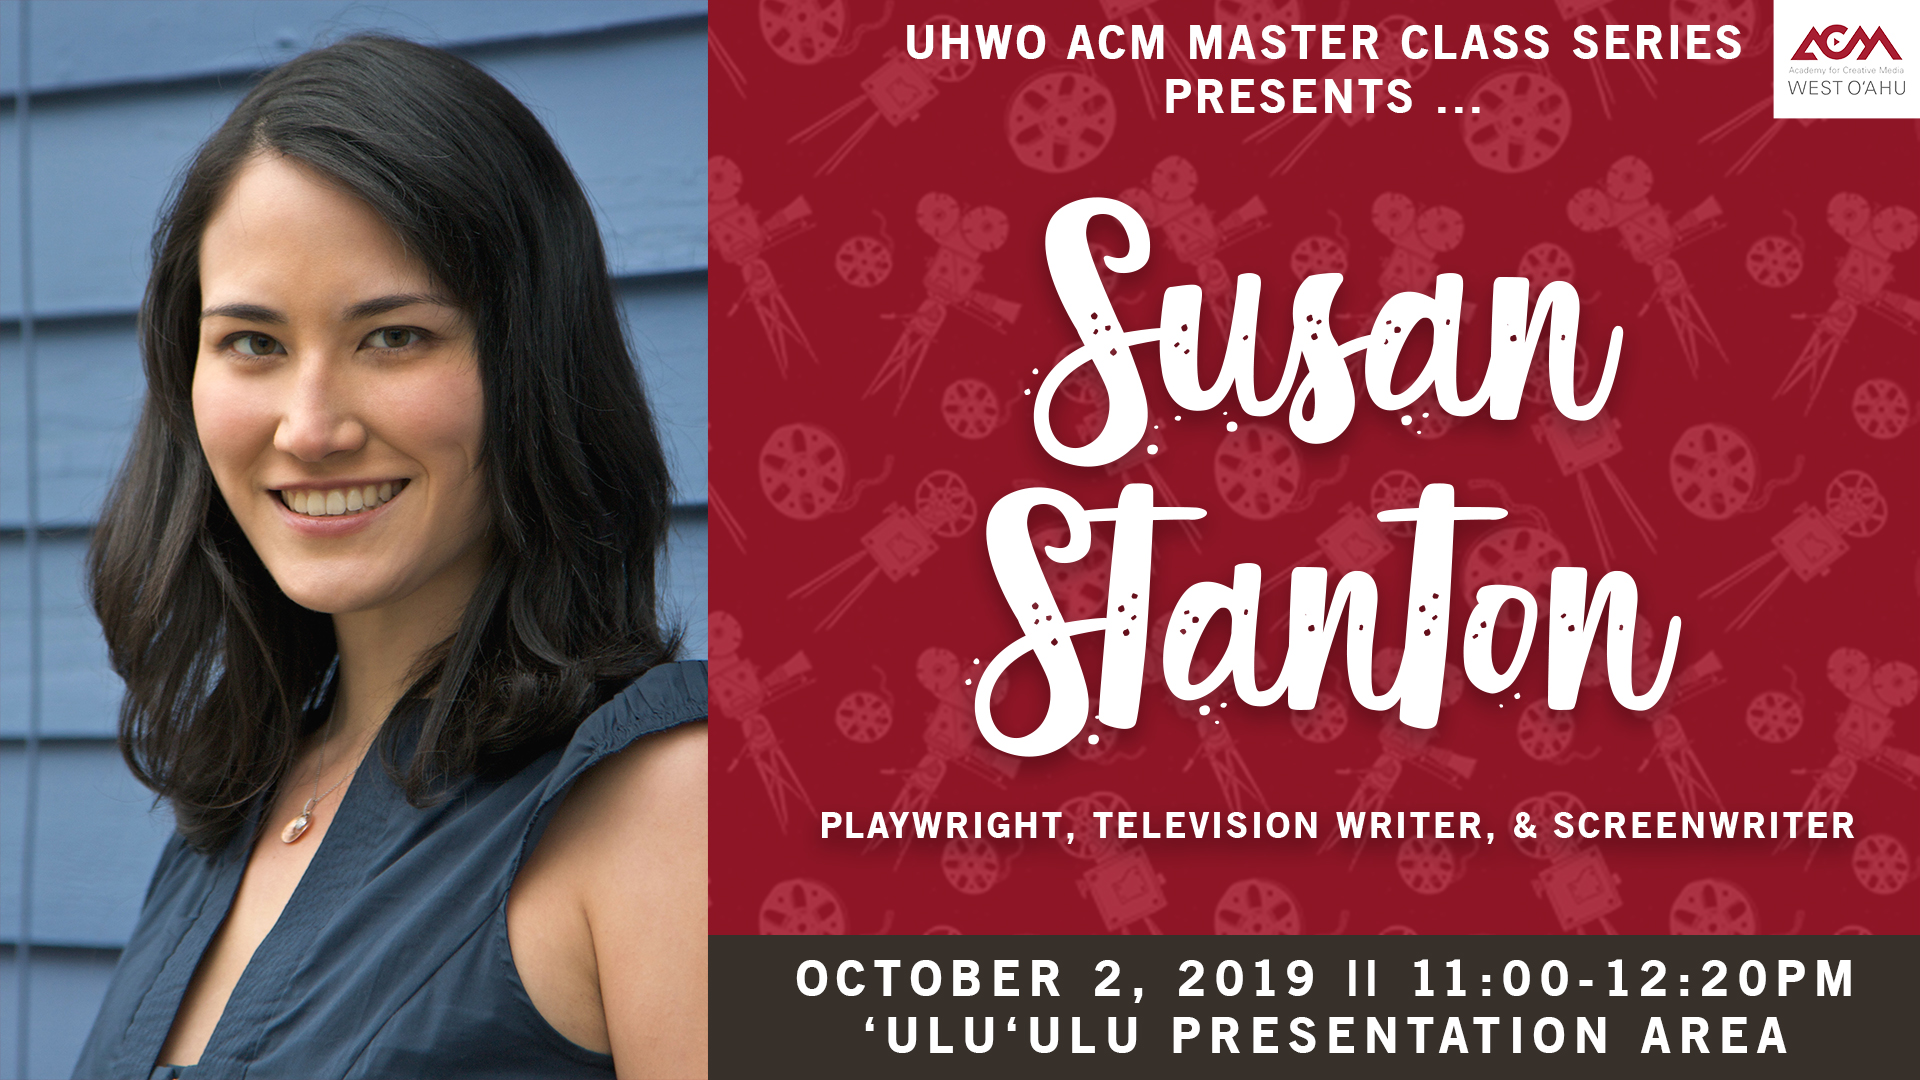 Flyer for Creative Media class for Susan Stanton on October 2 at 11 a.m.